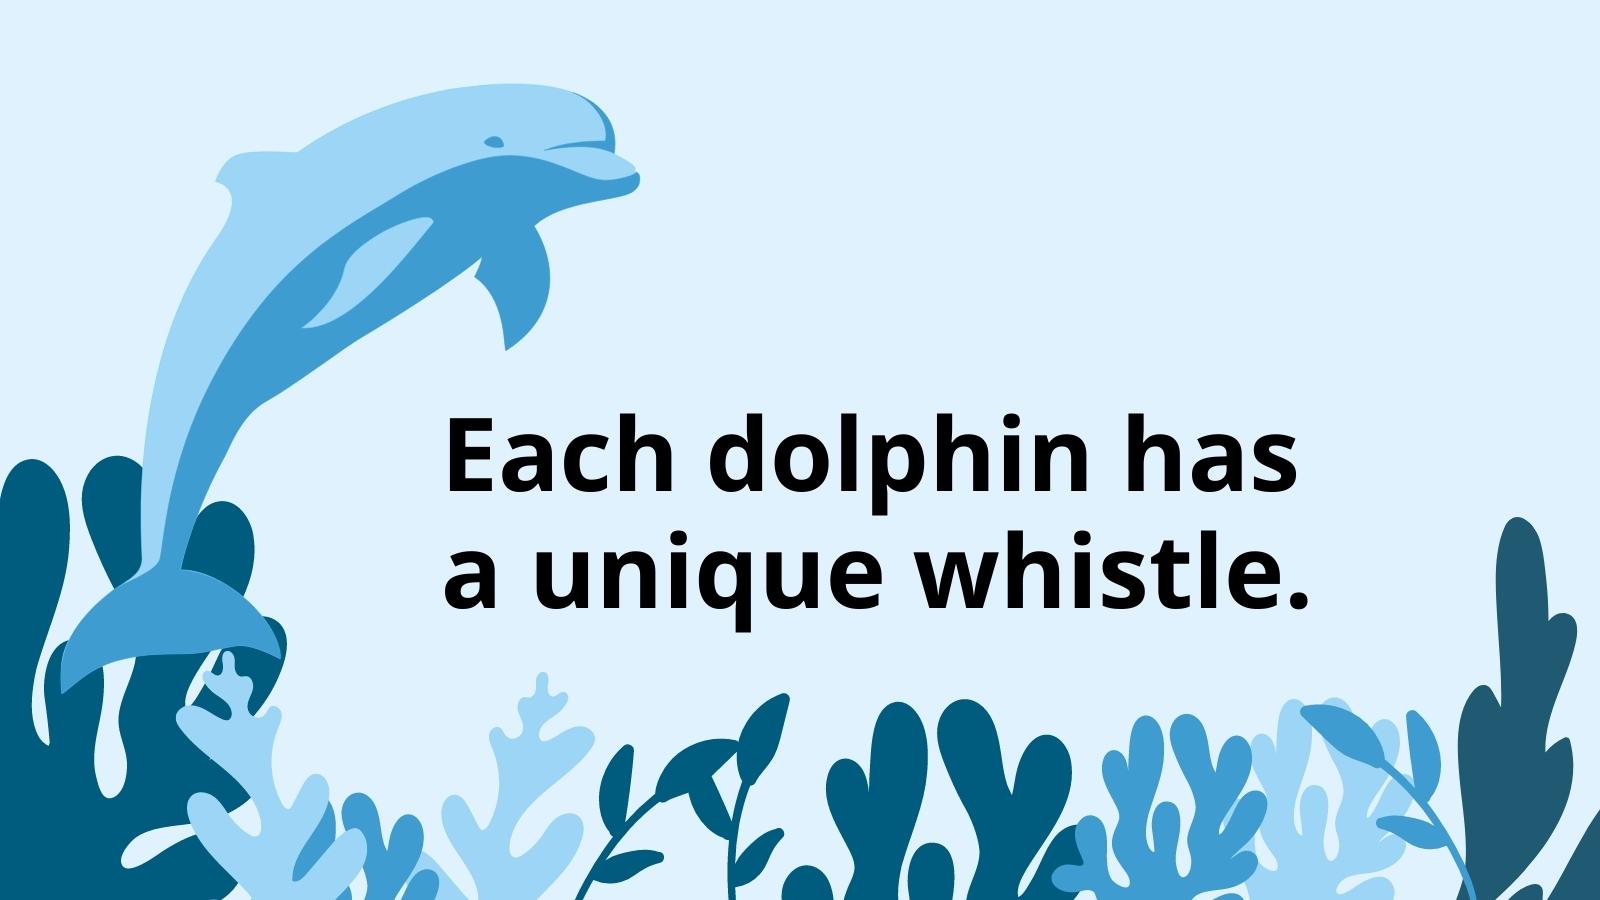 23 Fascinating Dolphin Facts for Kids